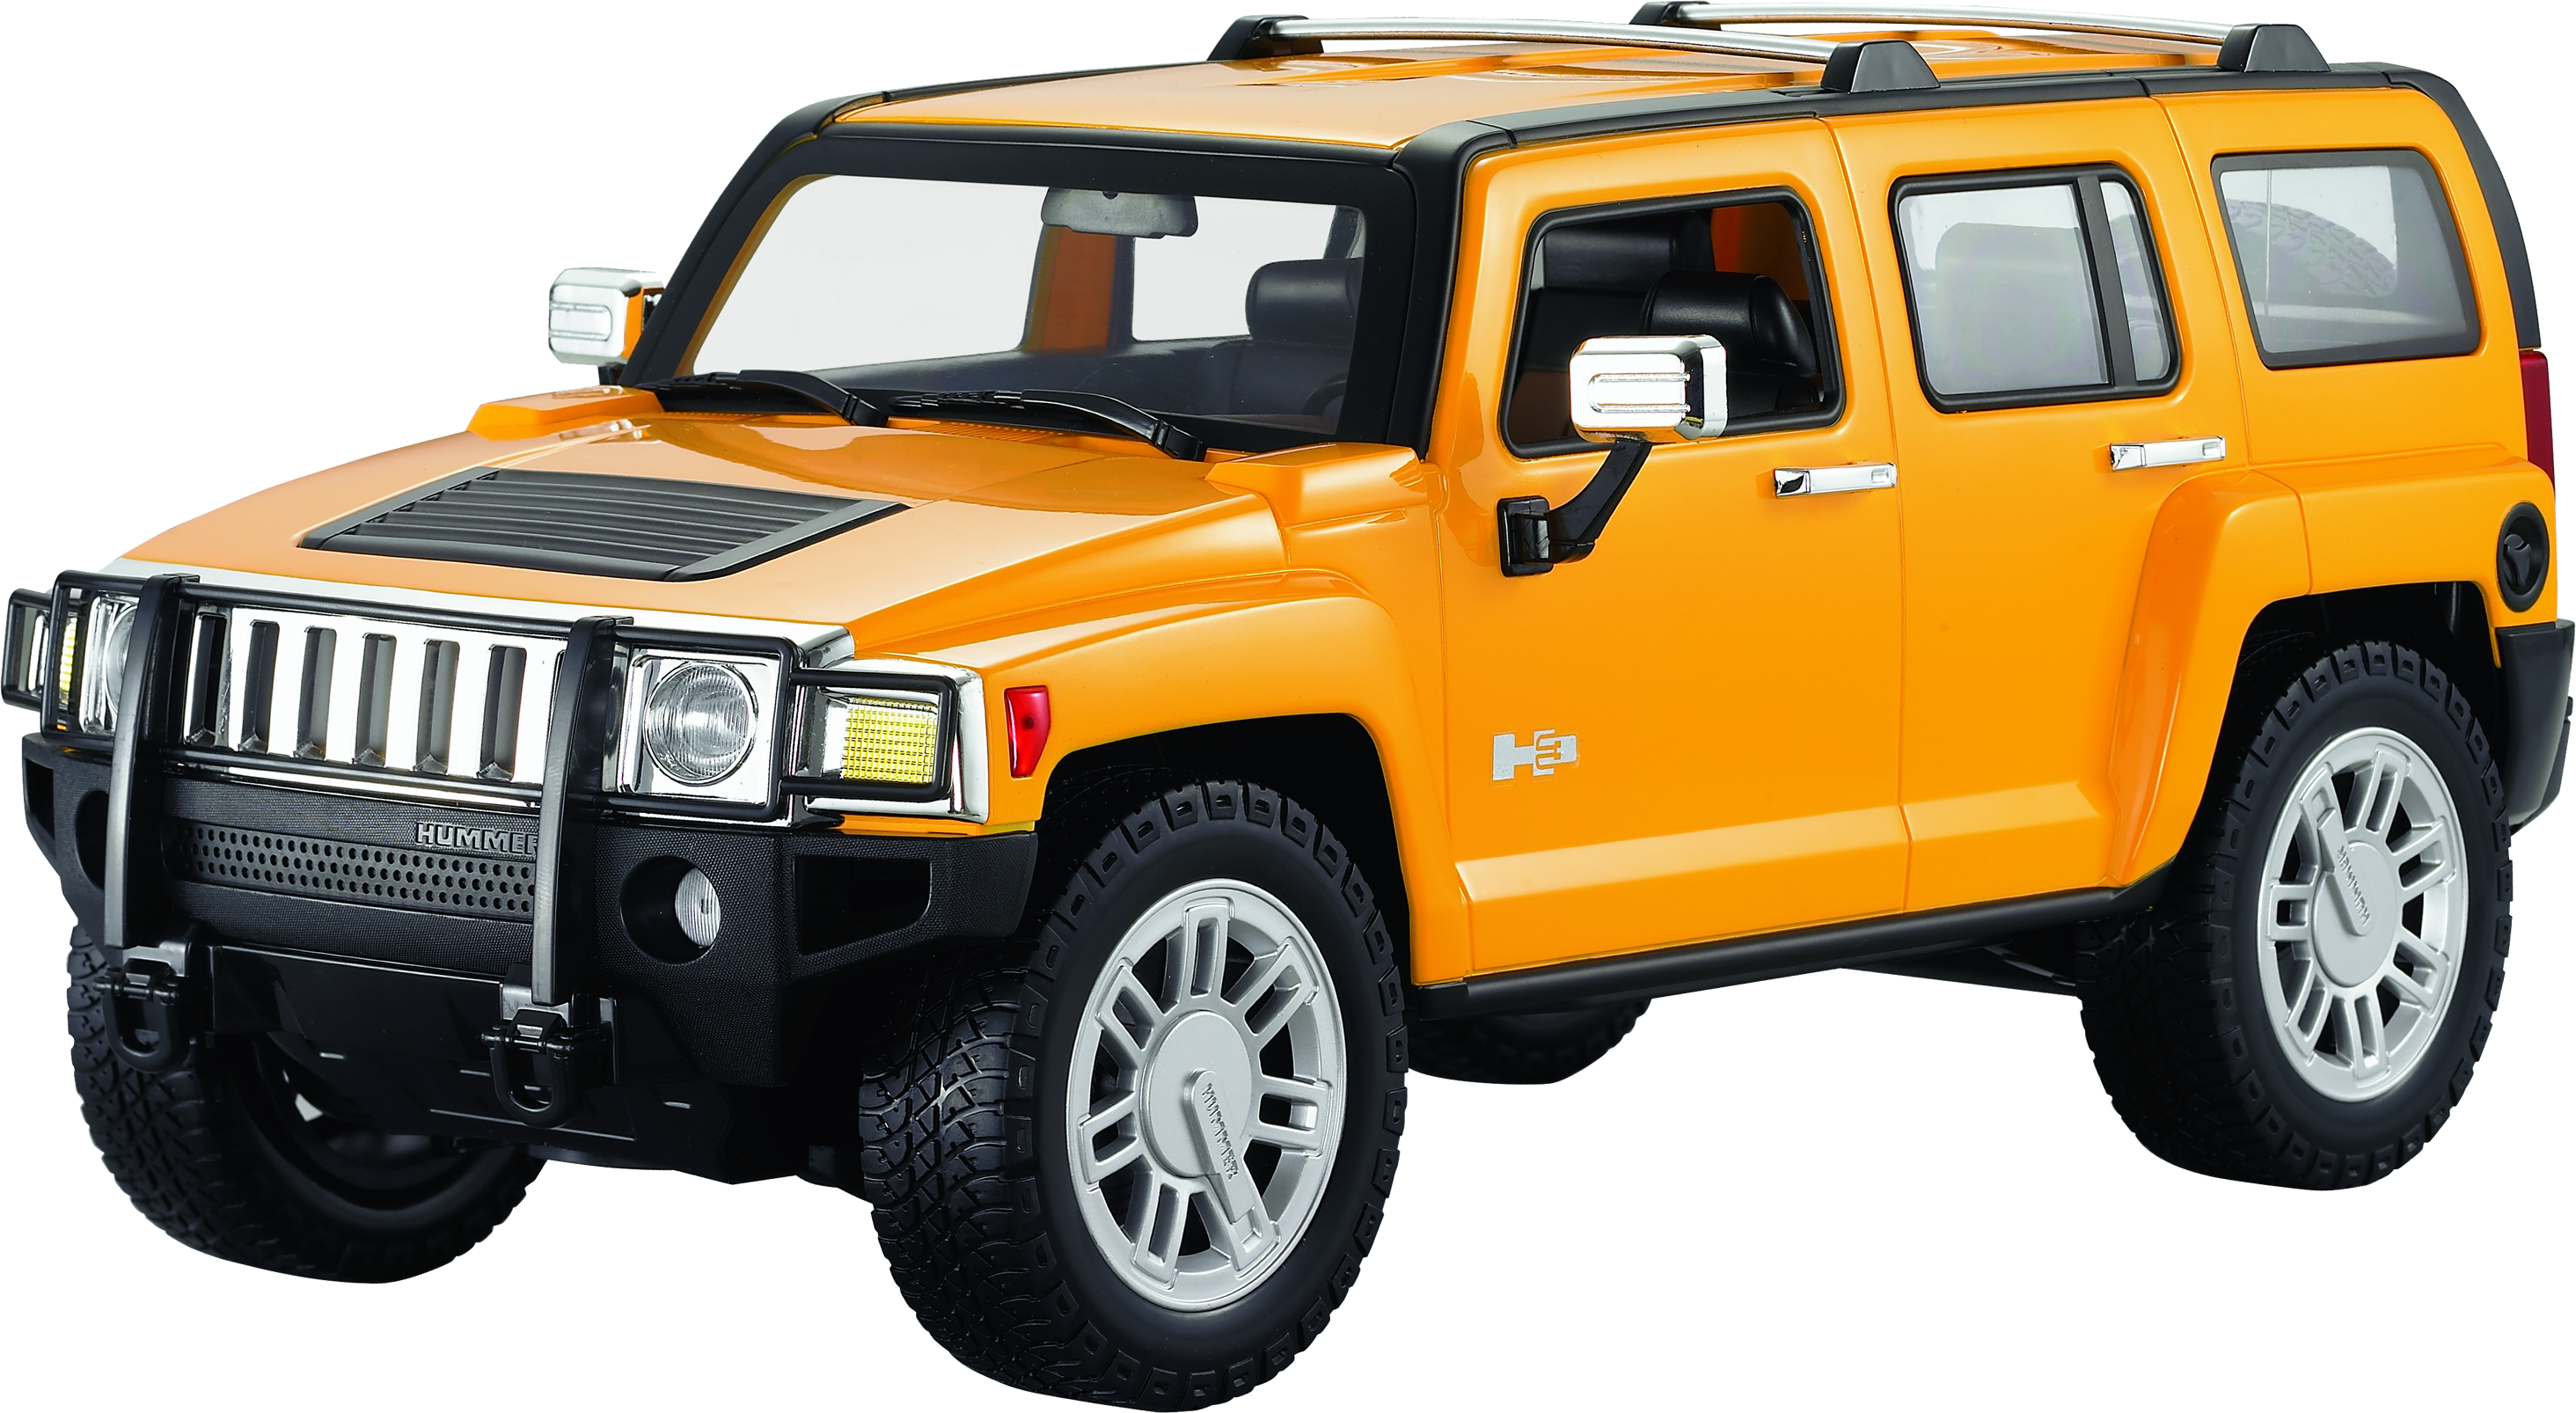 Hummer HX PNG Free Download